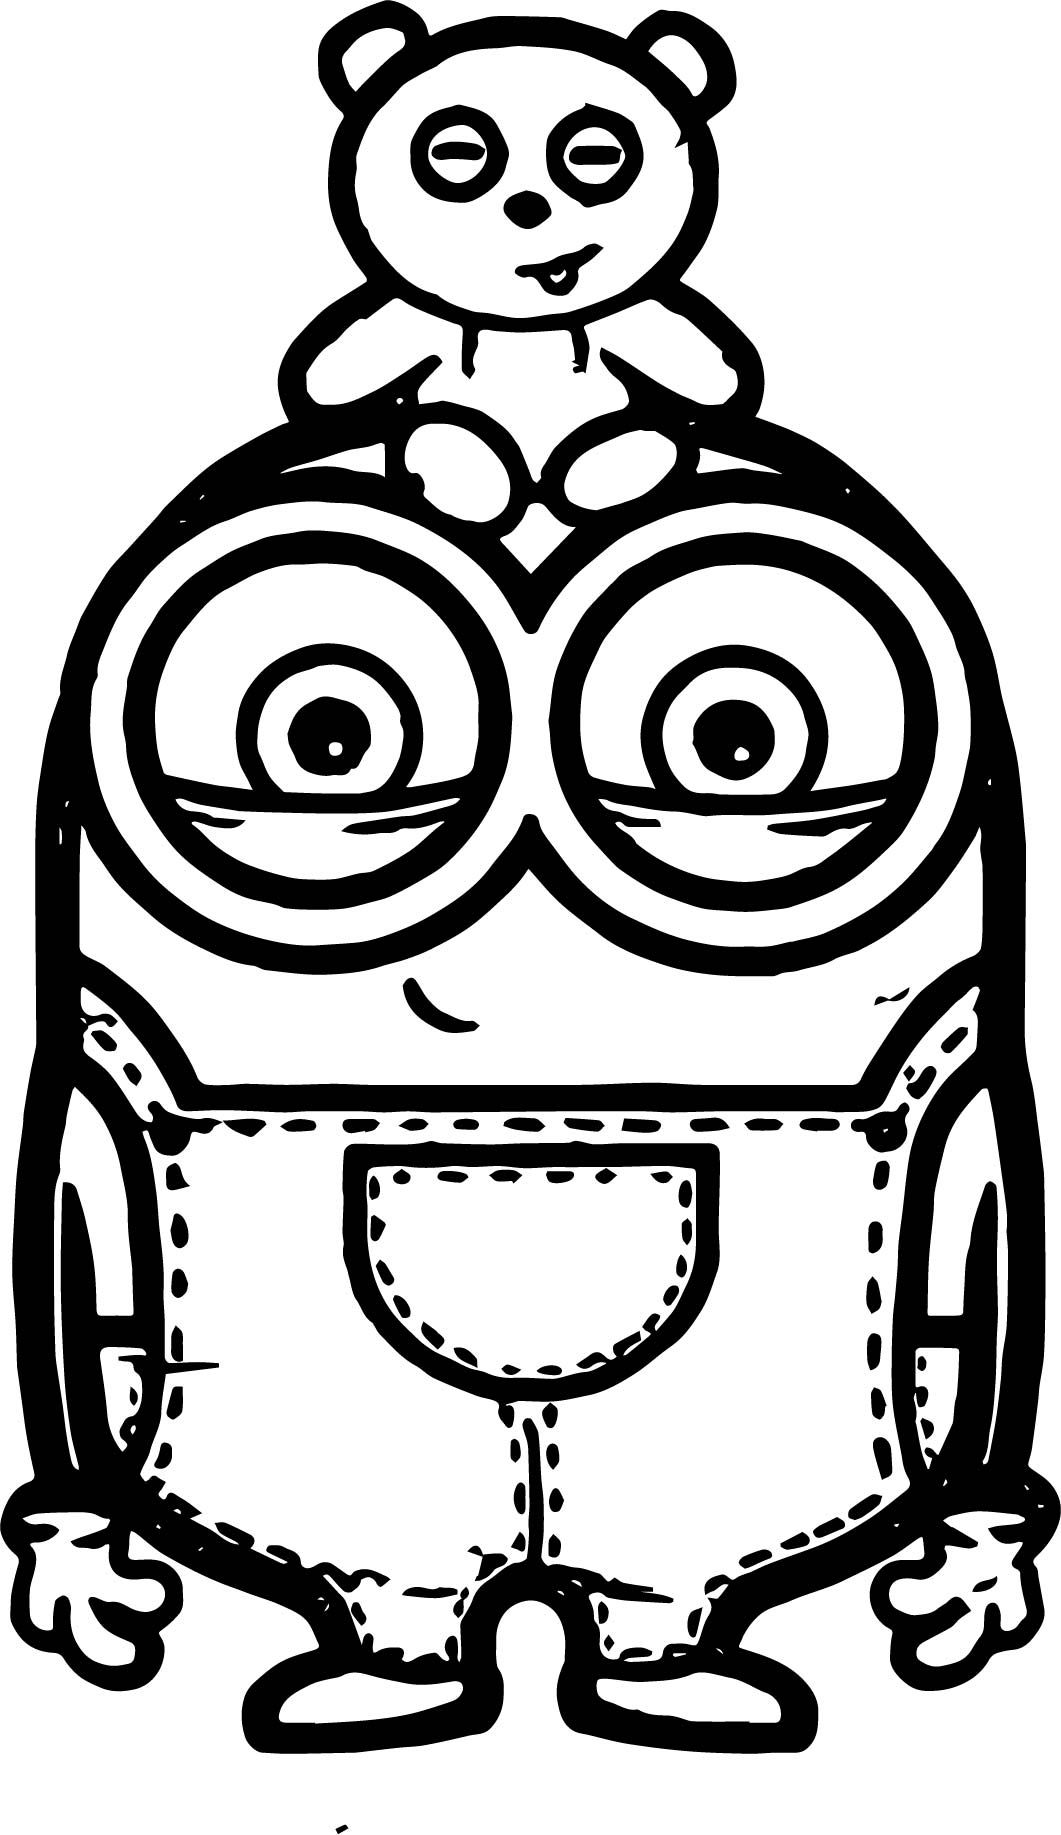 Minion bob and bear toy coloring page